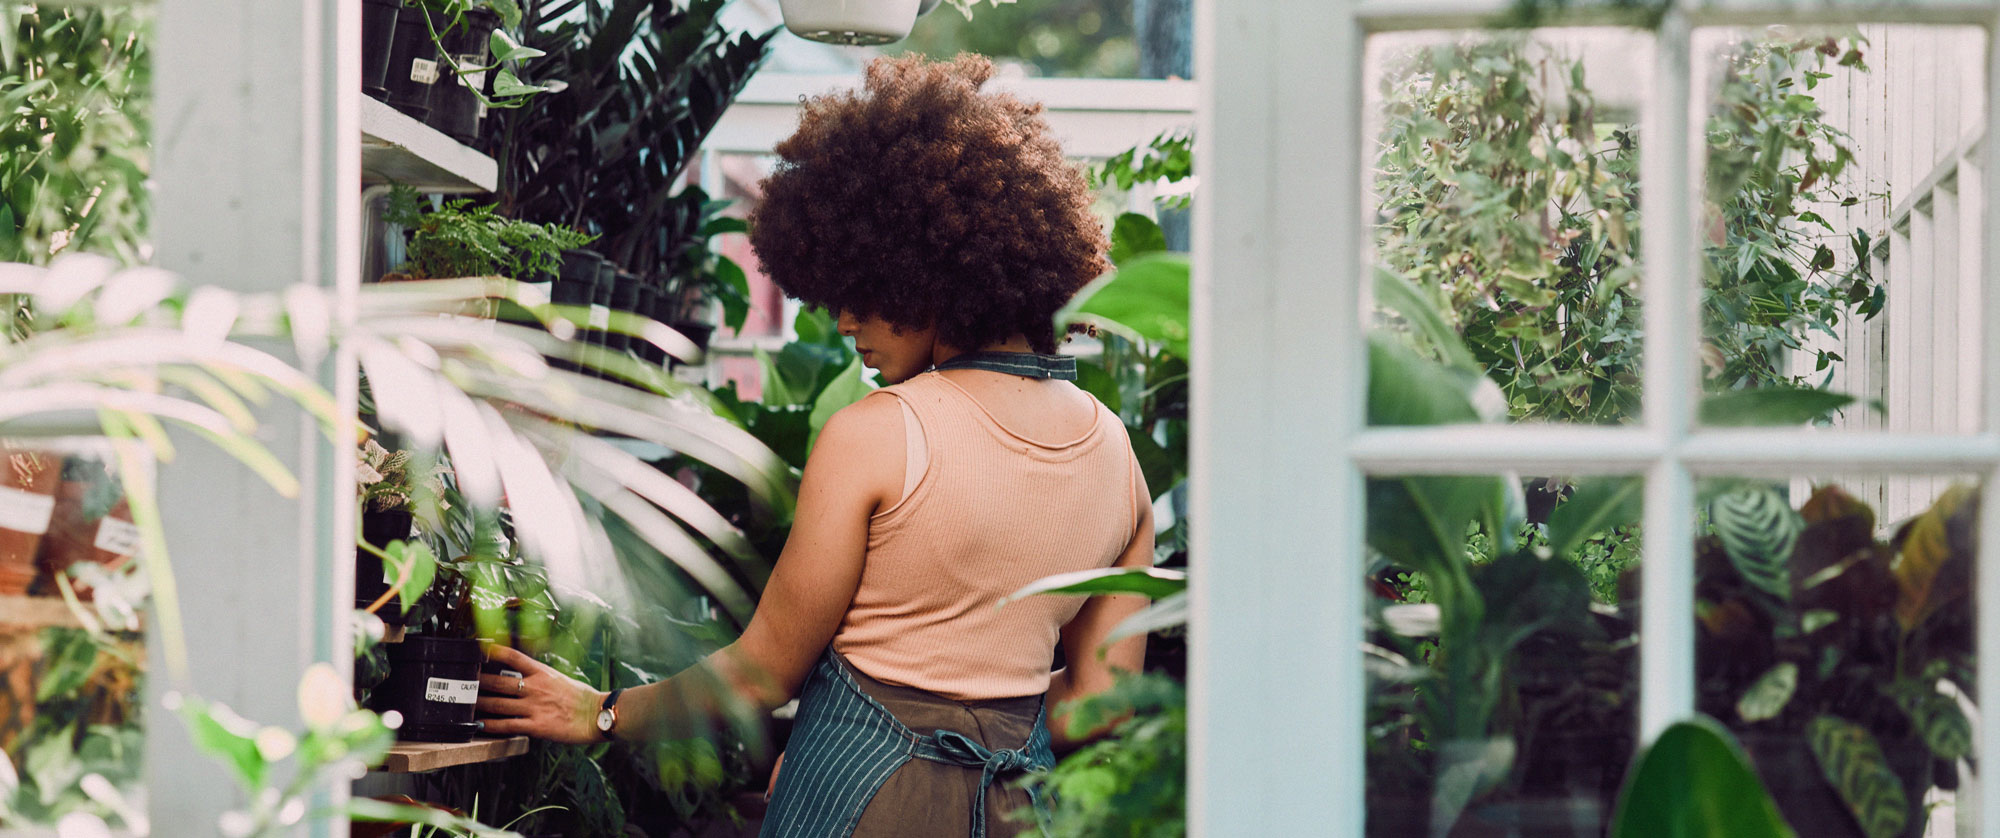 Black woman shopping in her plant shop